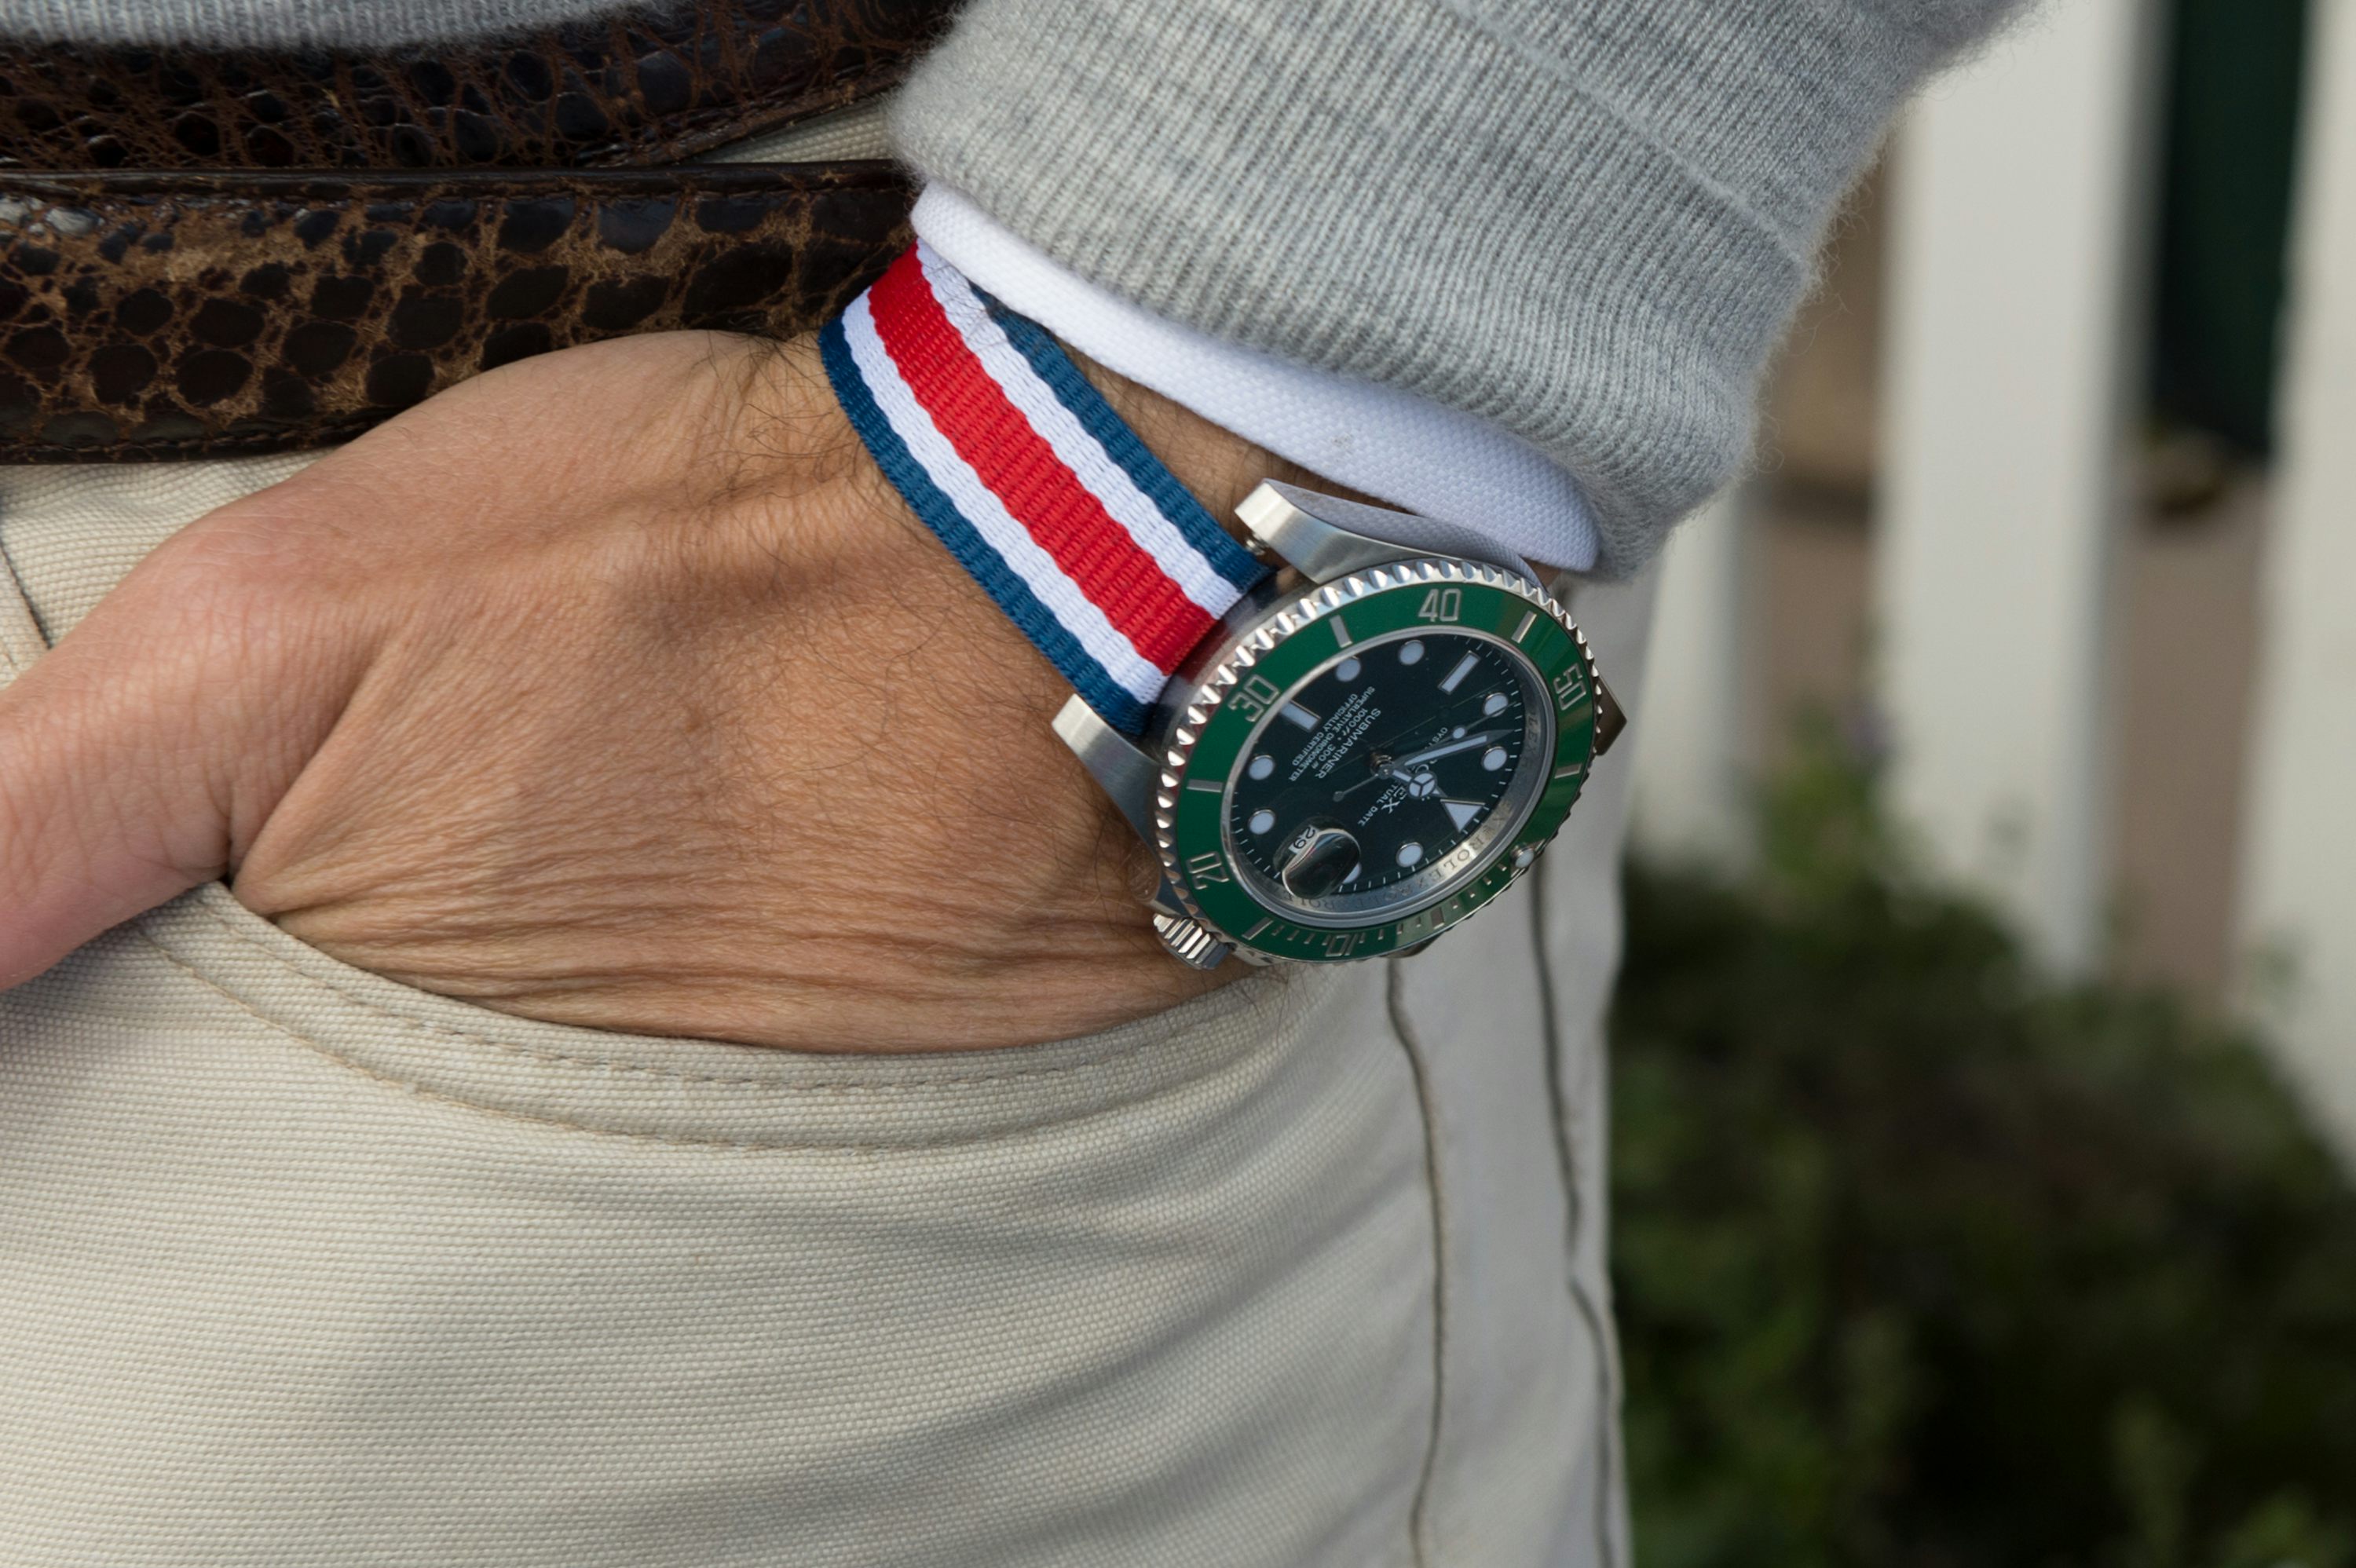 Pin by Dan Woolley on Watches Ryder cup, Hodinkee, Vintage watches